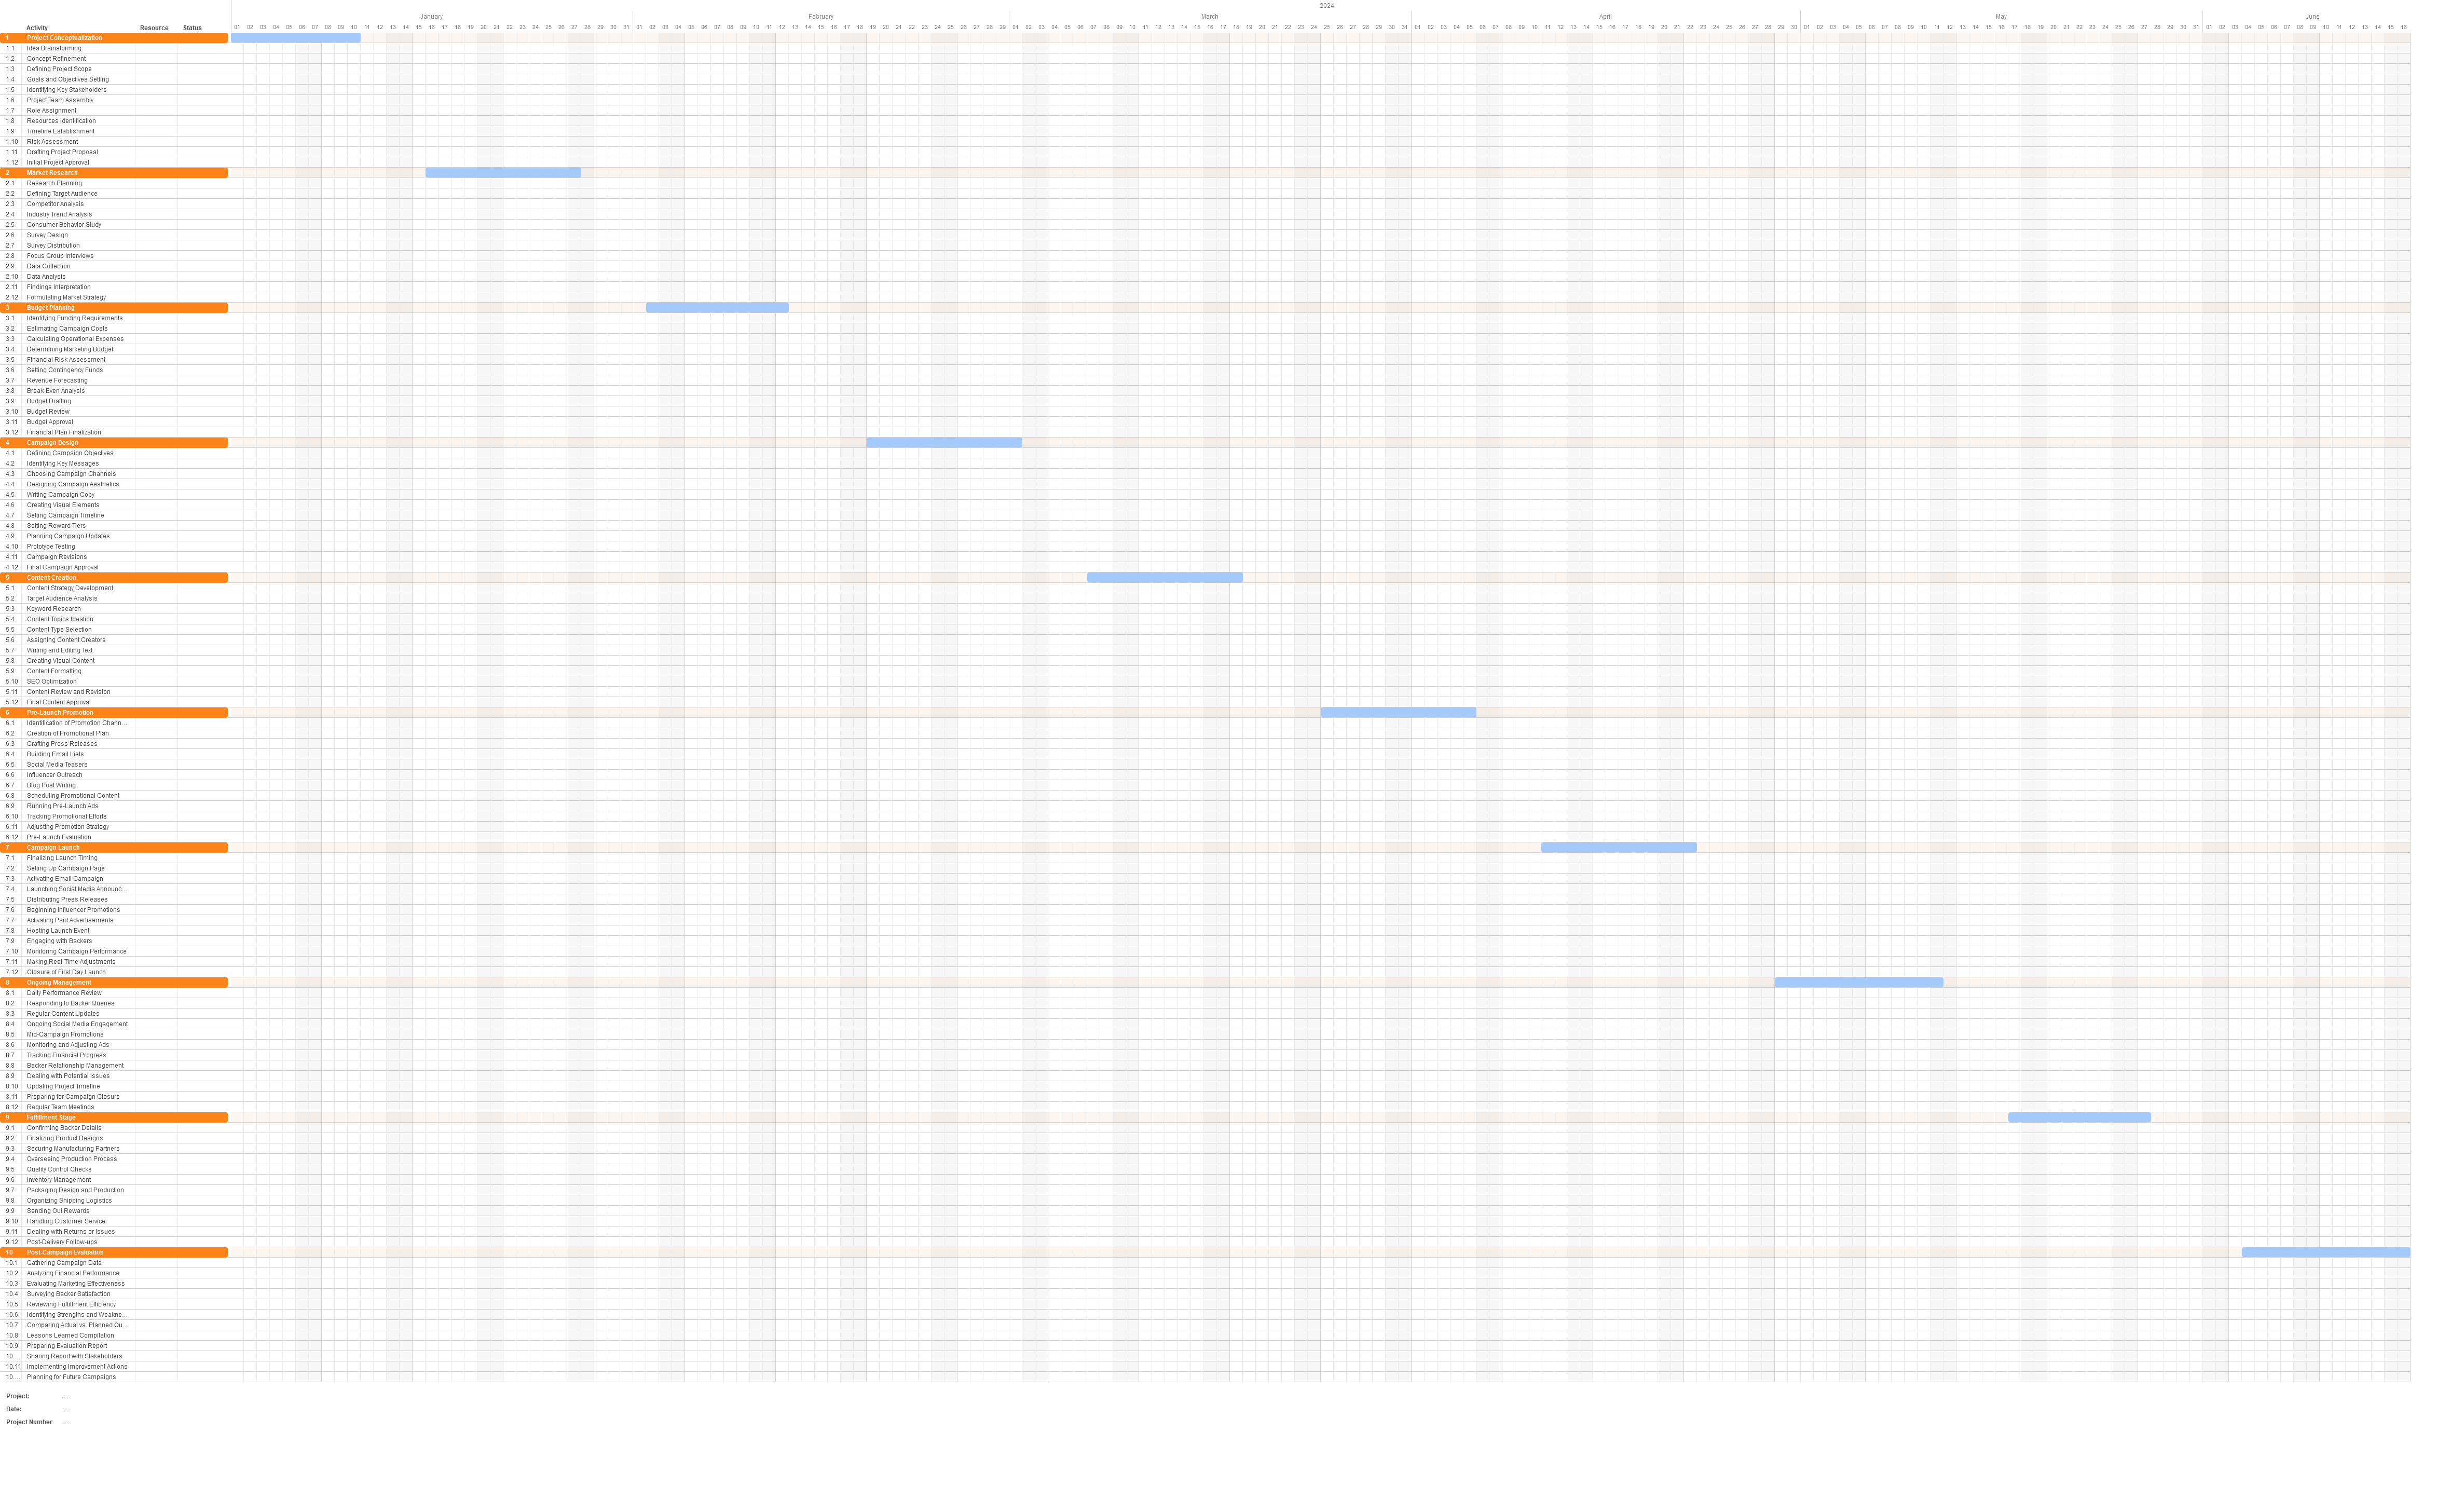 Gantt chart for a Crowdfunding Campaign project